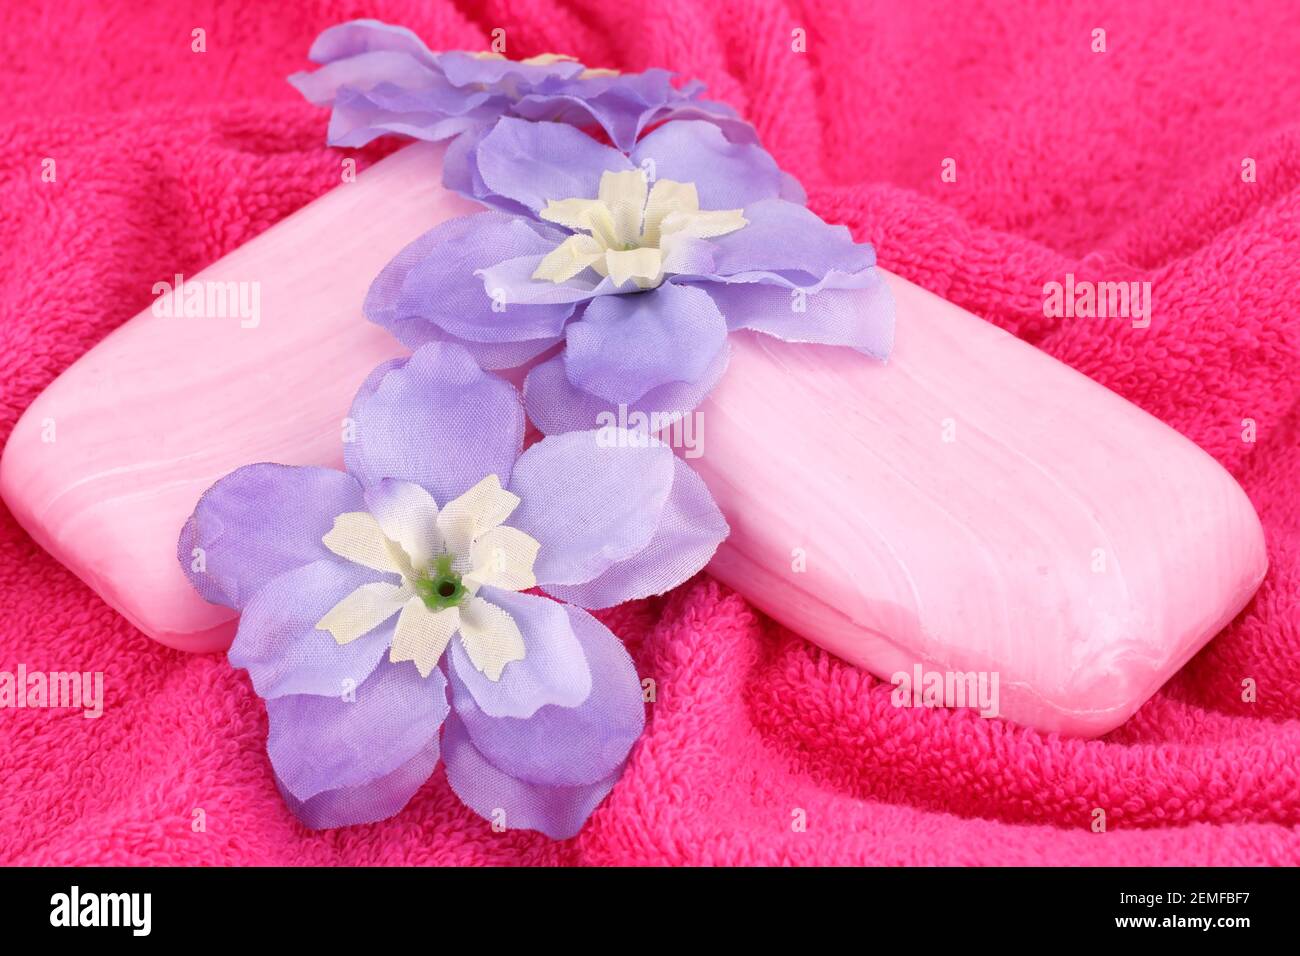 Pink soaps and flowers on red towel. Stock Photo